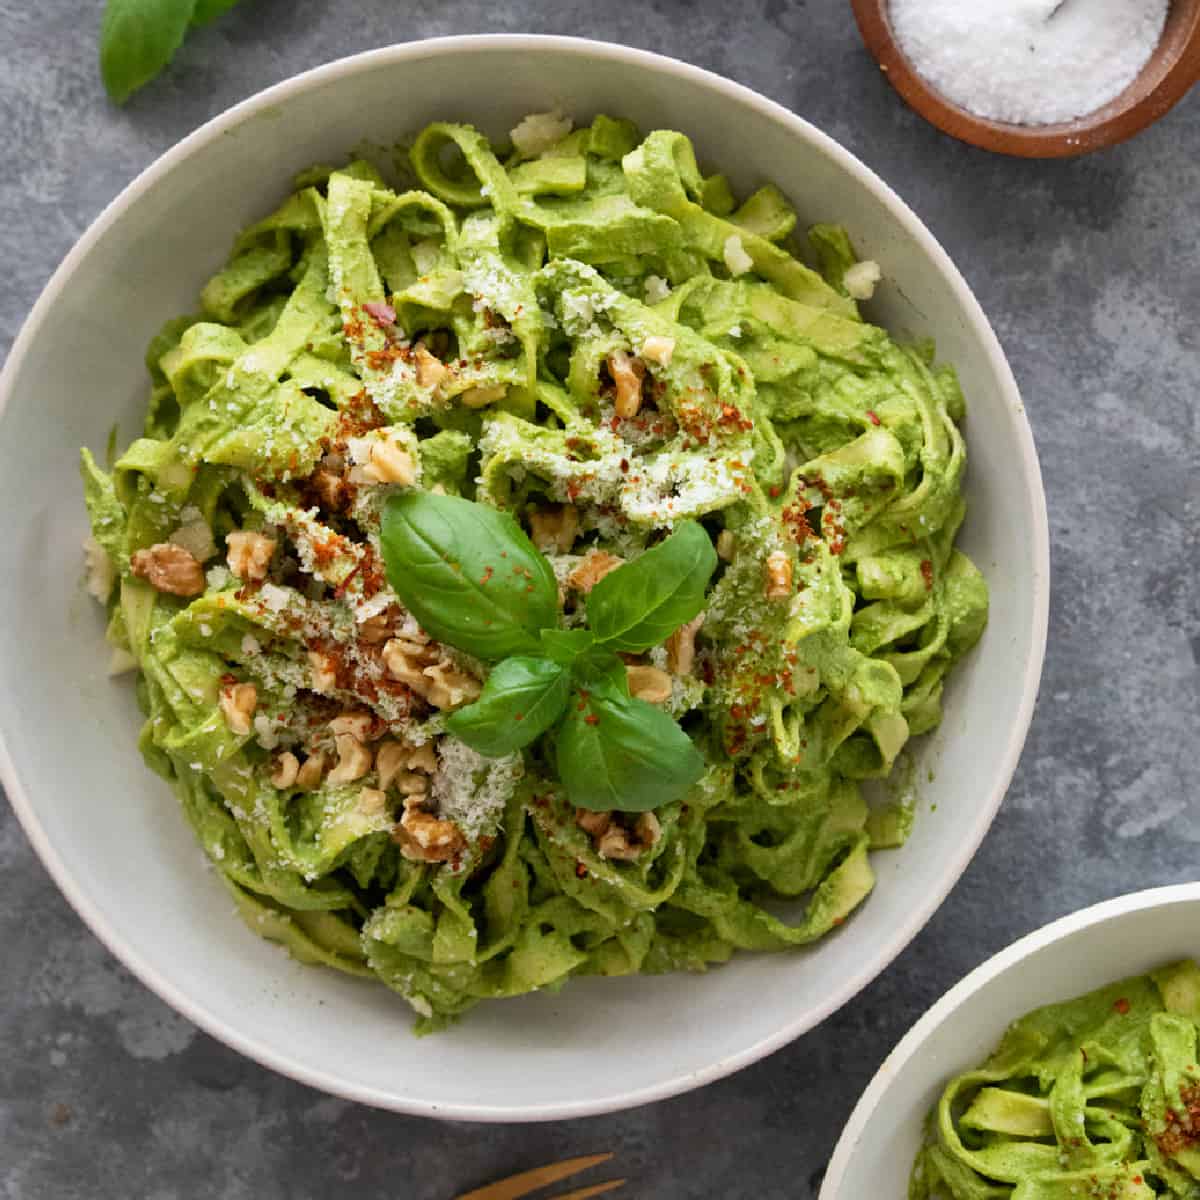 This spinach pesto pasta is creamy and rich, plus it's loaded with vegetables. Easy to make and ready in 30 minutes, this vegetarian pasta is both healthy and delicious.
